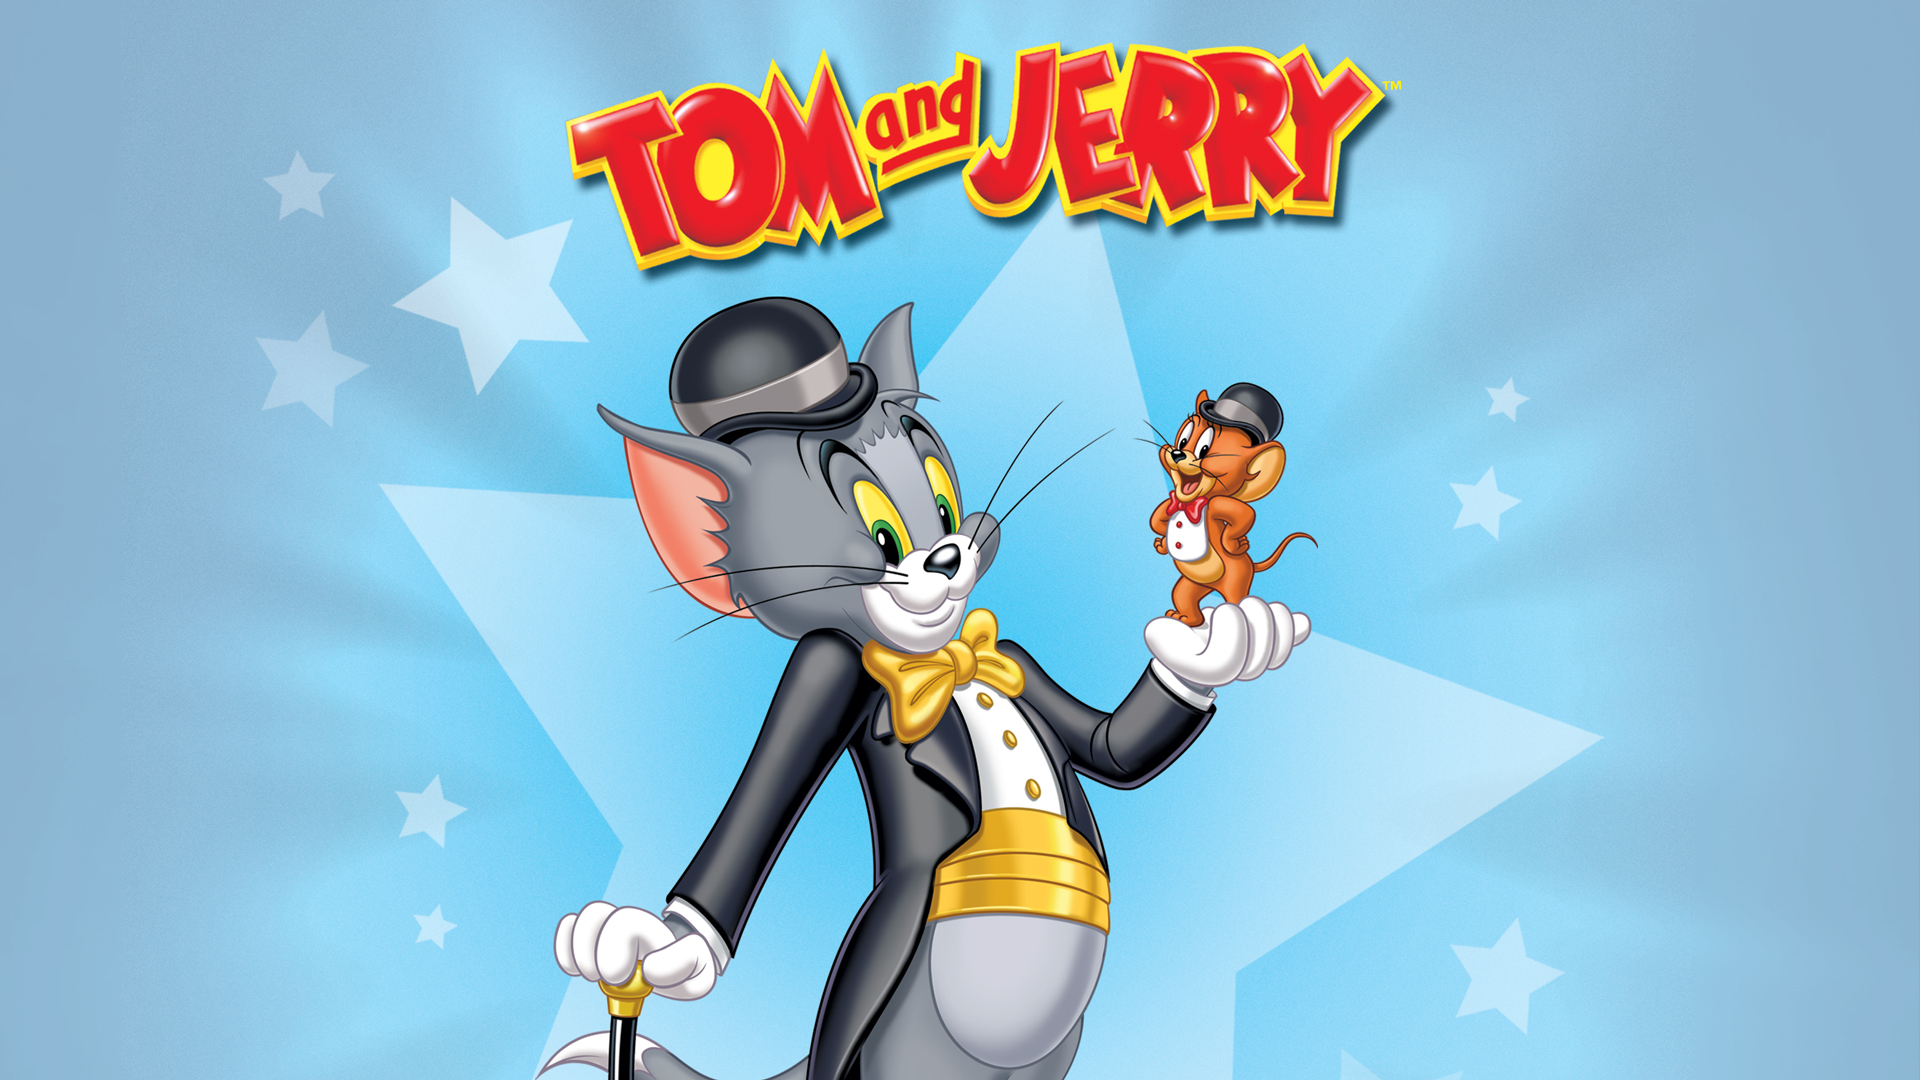 alexander kuehne recommends Tom And Jerry Full Episodes Online